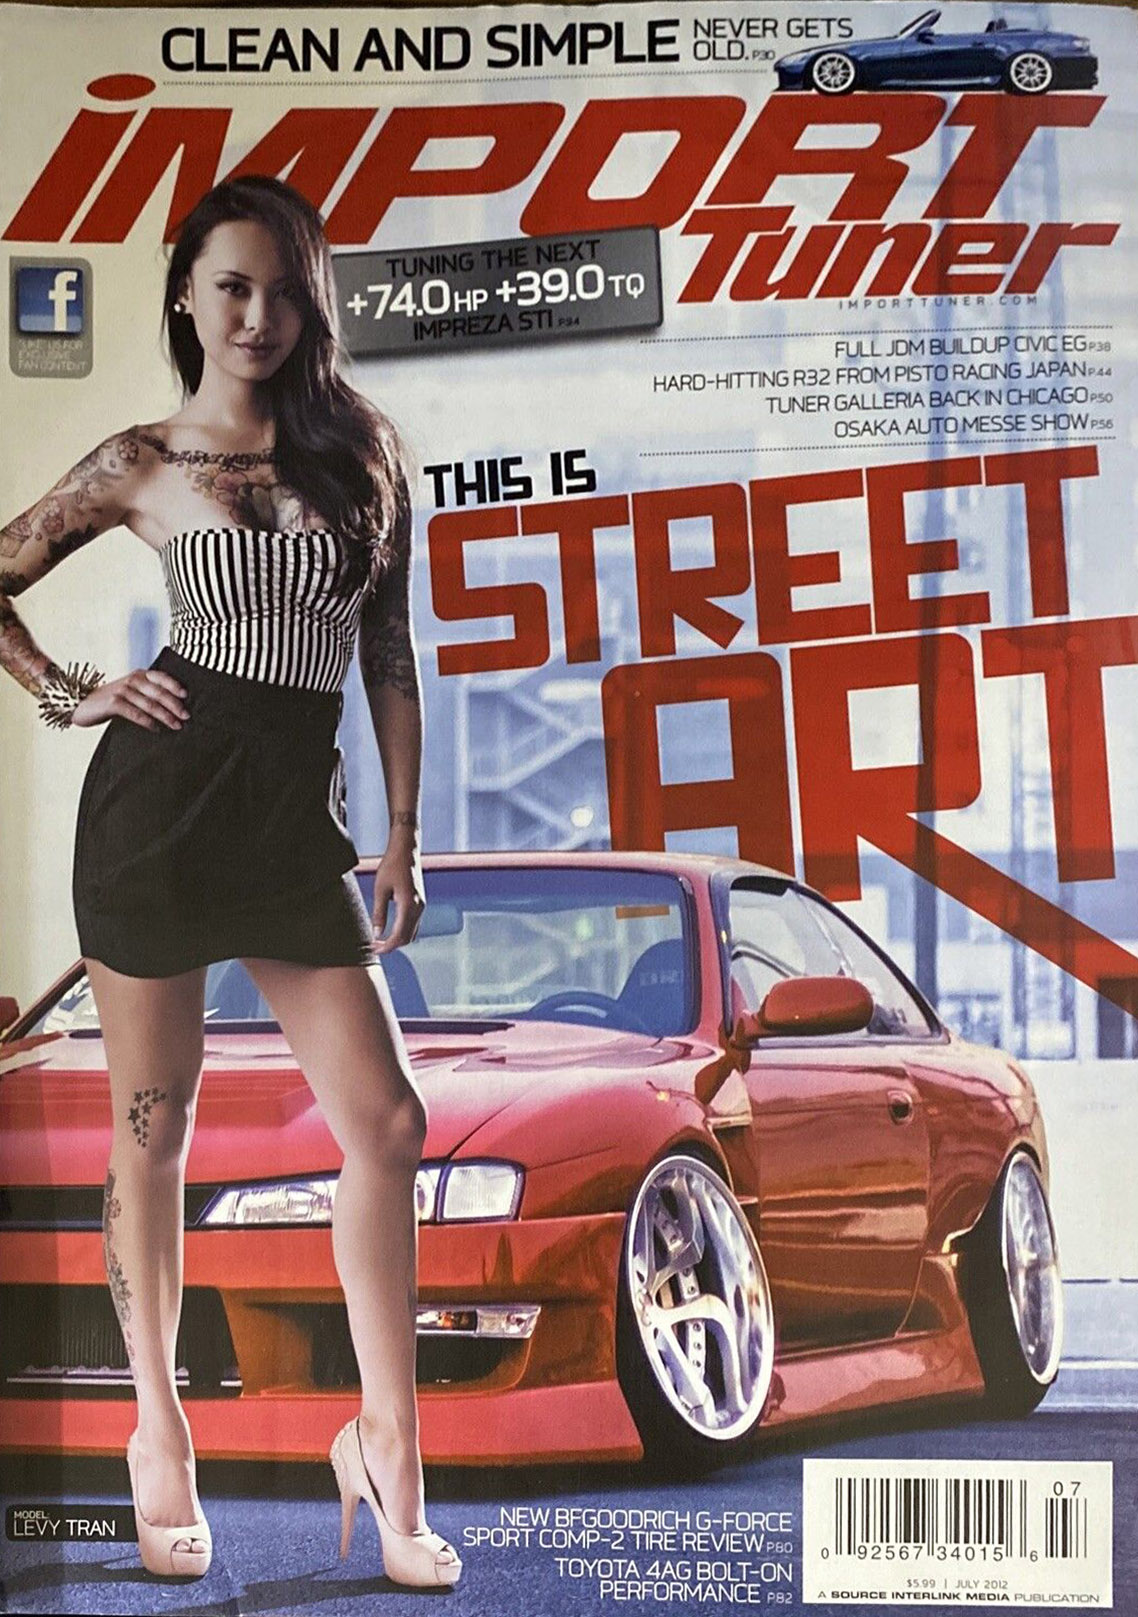 Import Tuner # 159, July 2012, , Clean And Simple Never Gets Old